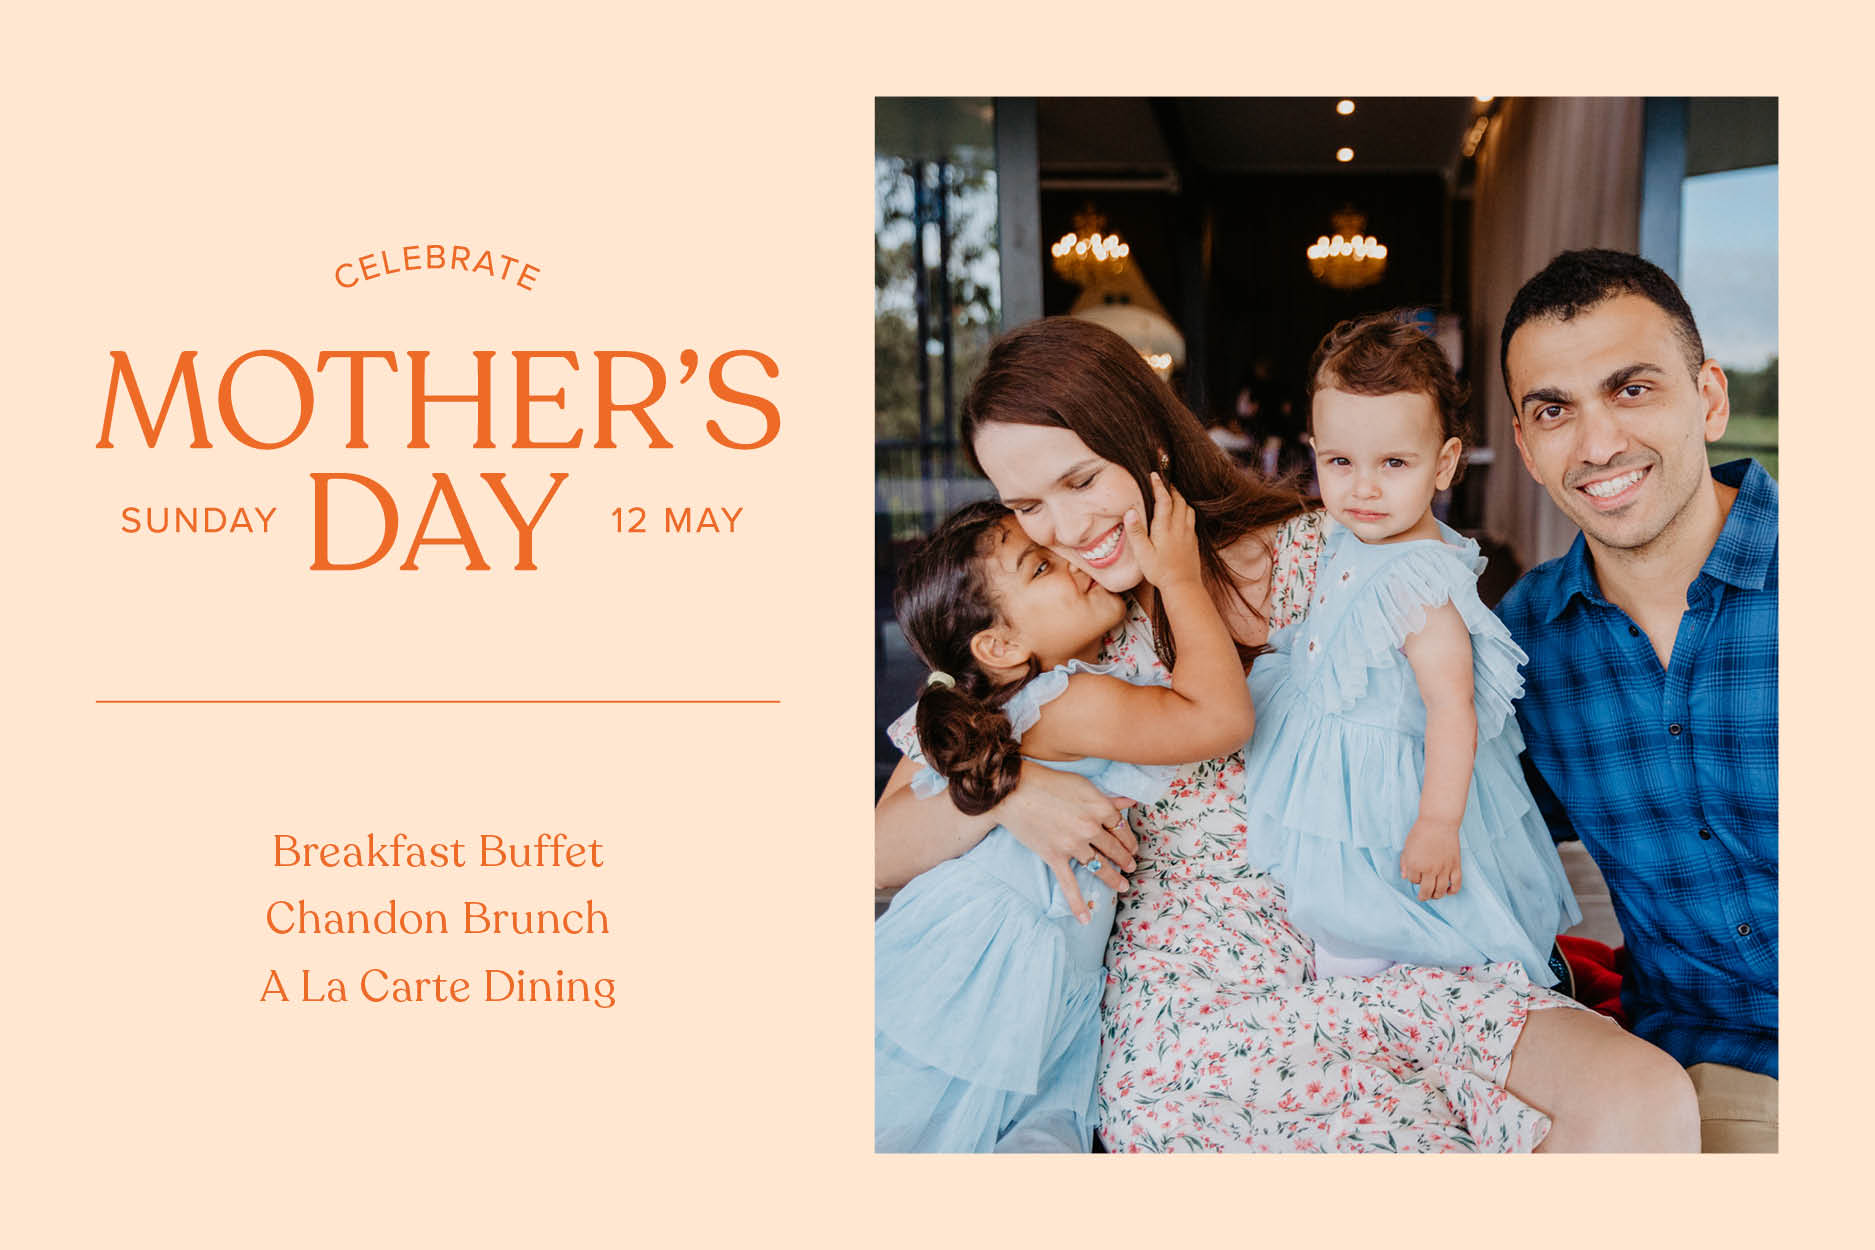 Celebrate Mother’s Day at Victoria Park